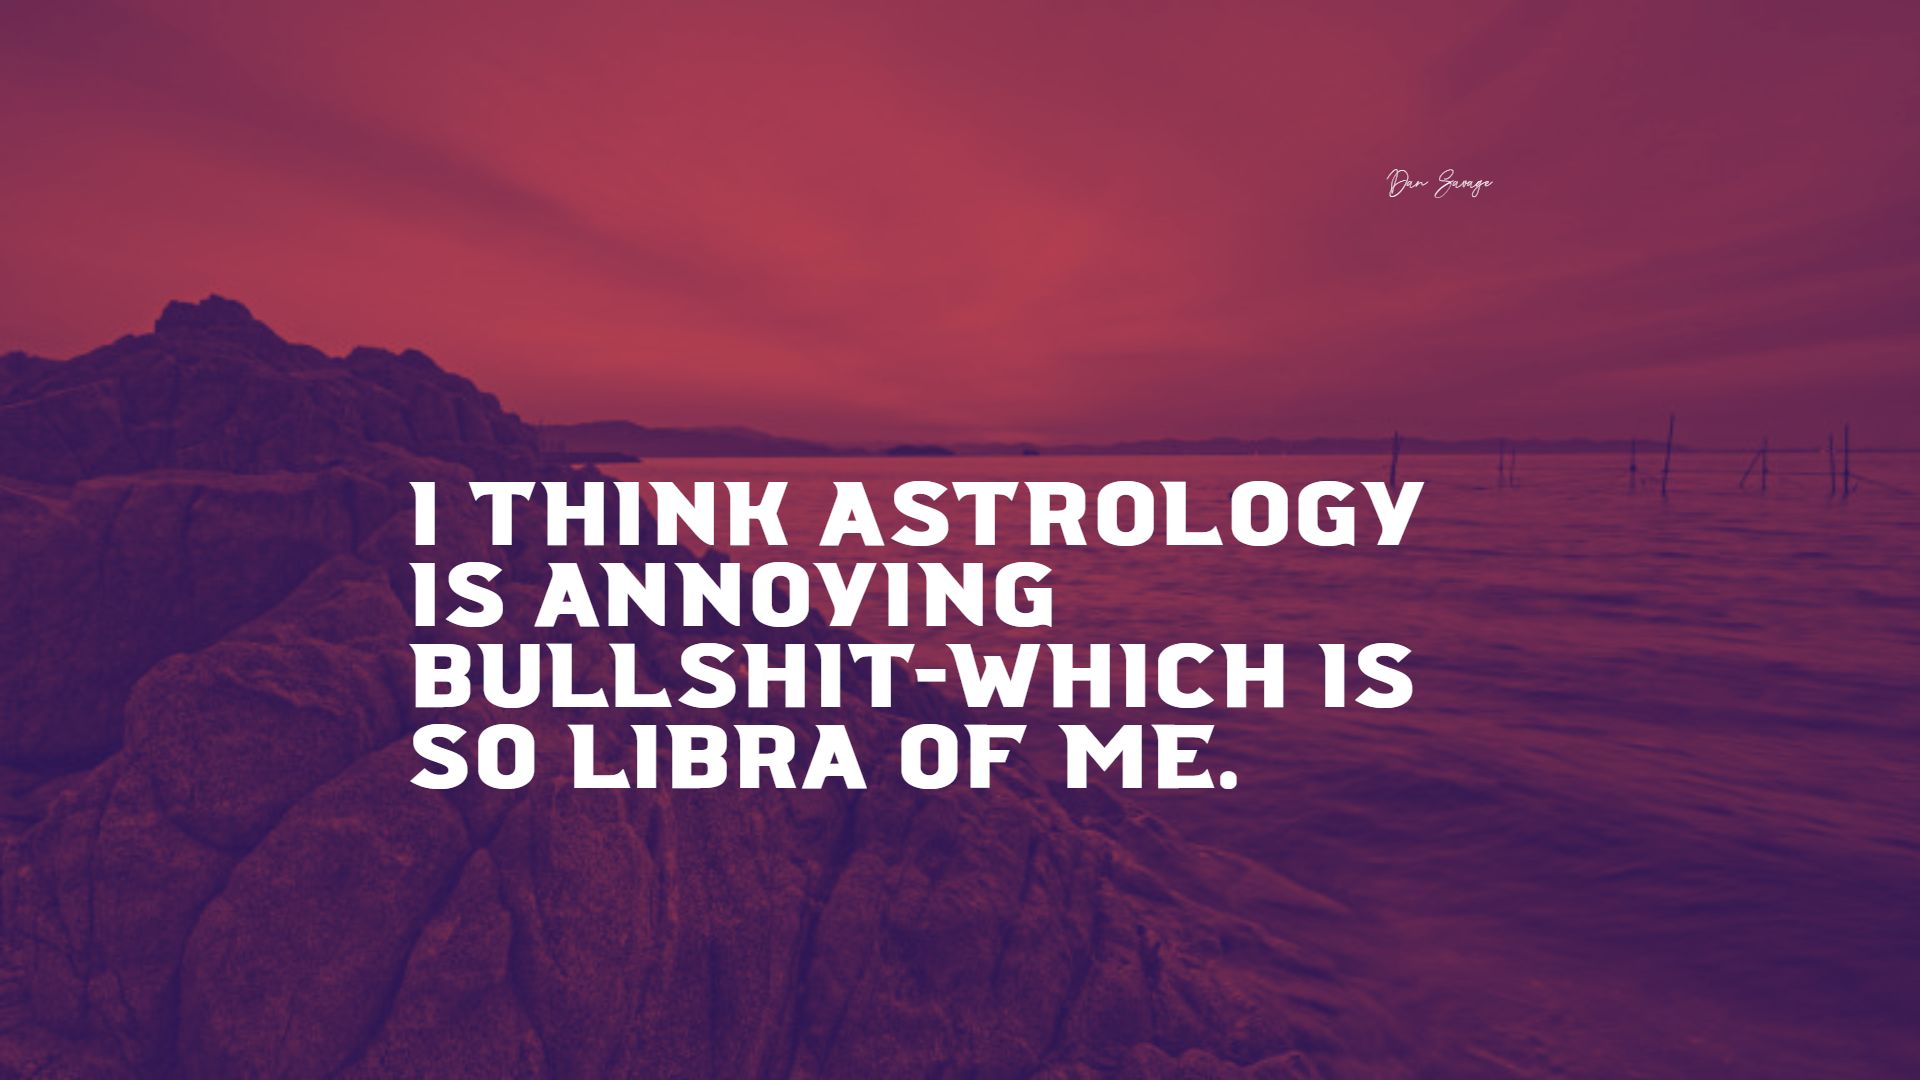 astrology does not work